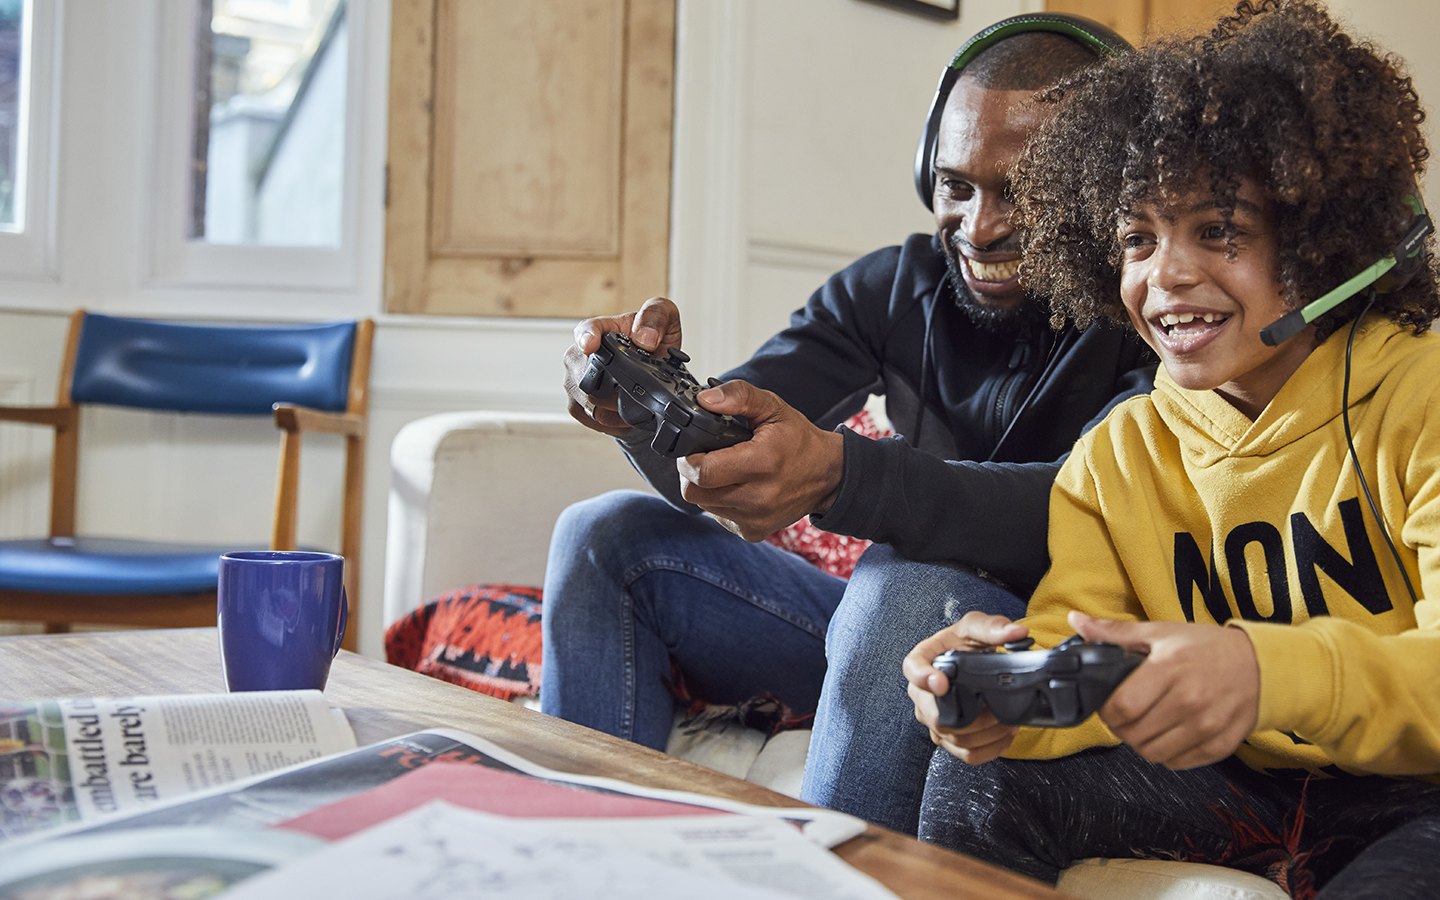 A parent/carer and their child playing a video game together in their living room.